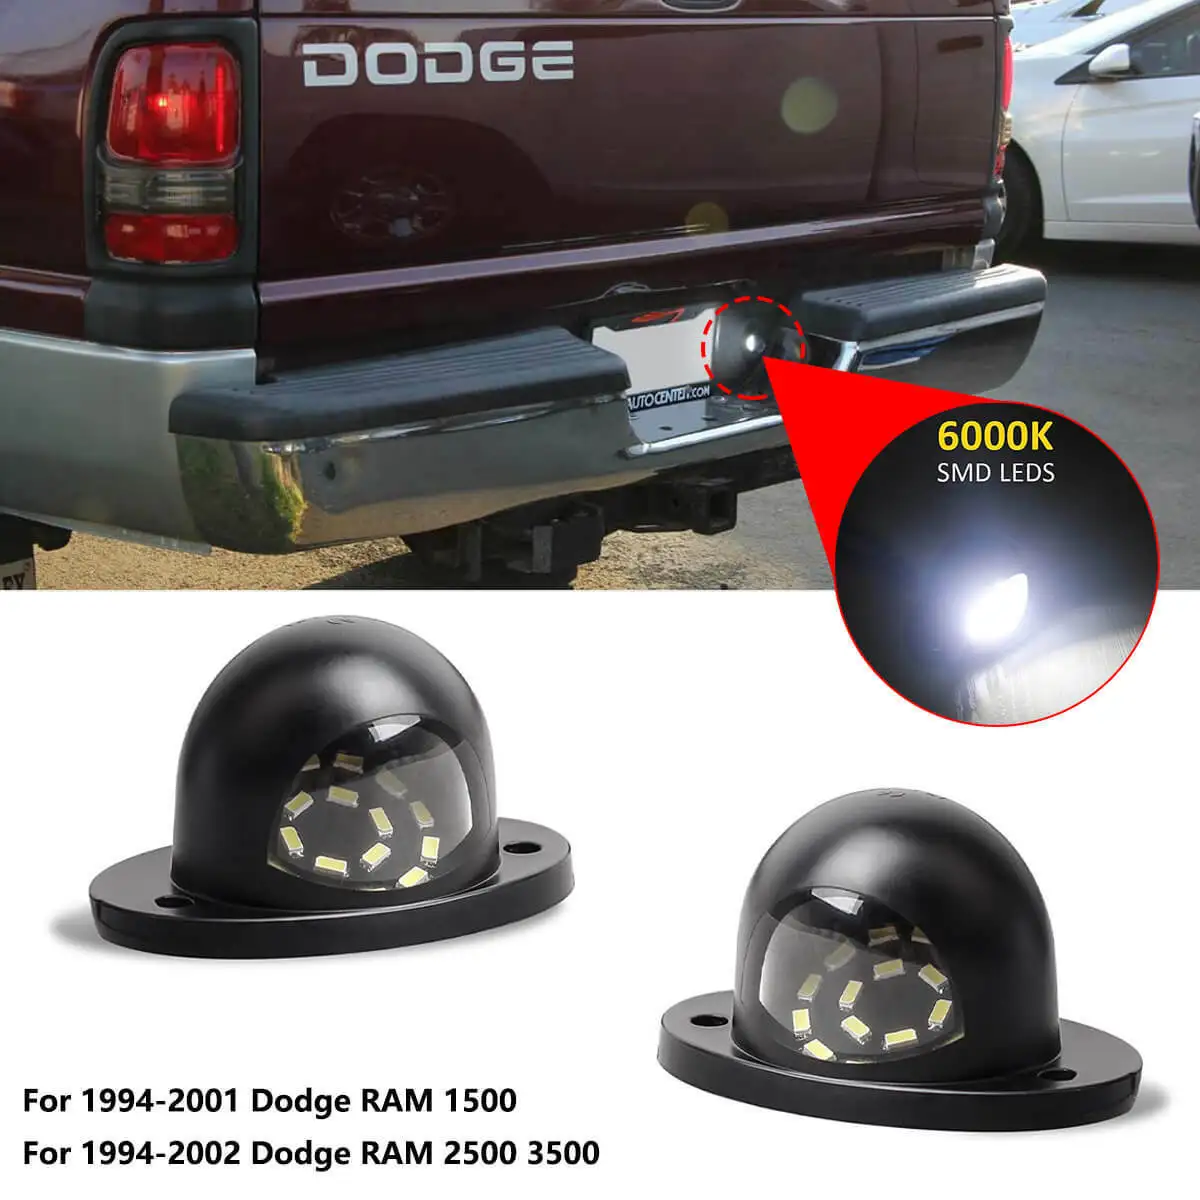 

LED License Plate Light For 1994-2001 Dodge RAM 1500 2500 3500 Pickup Truck, 6000K White, 2-Pieces Set Tag Lamp Assembly